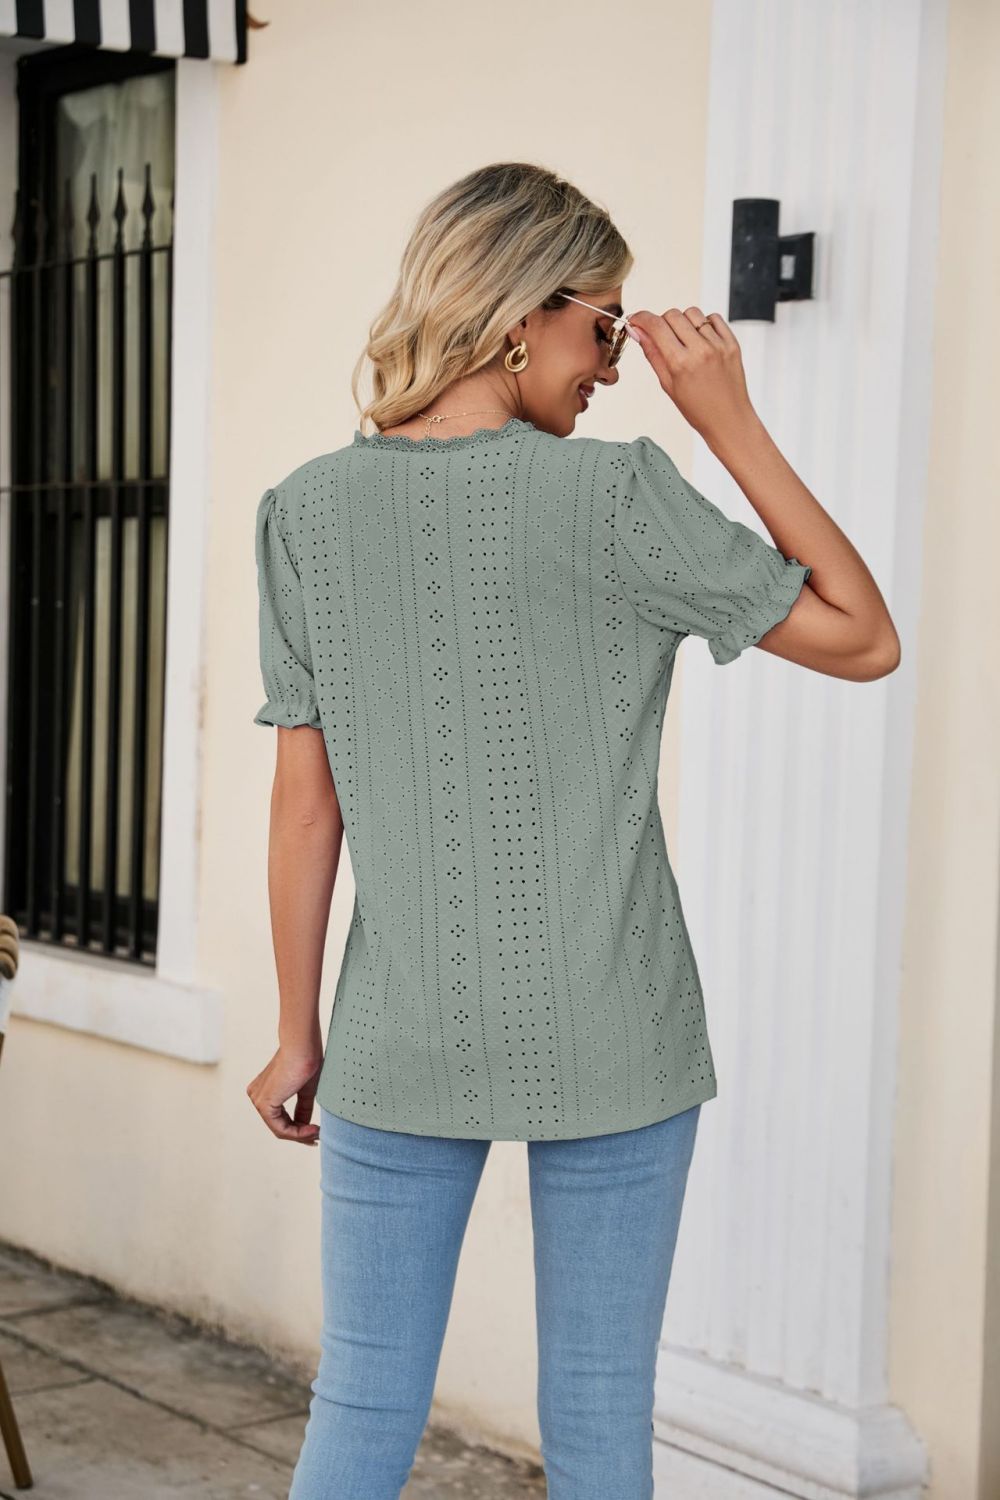 Eyelet Flounce Sleeve Scalloped V-Neck Top - Online Only